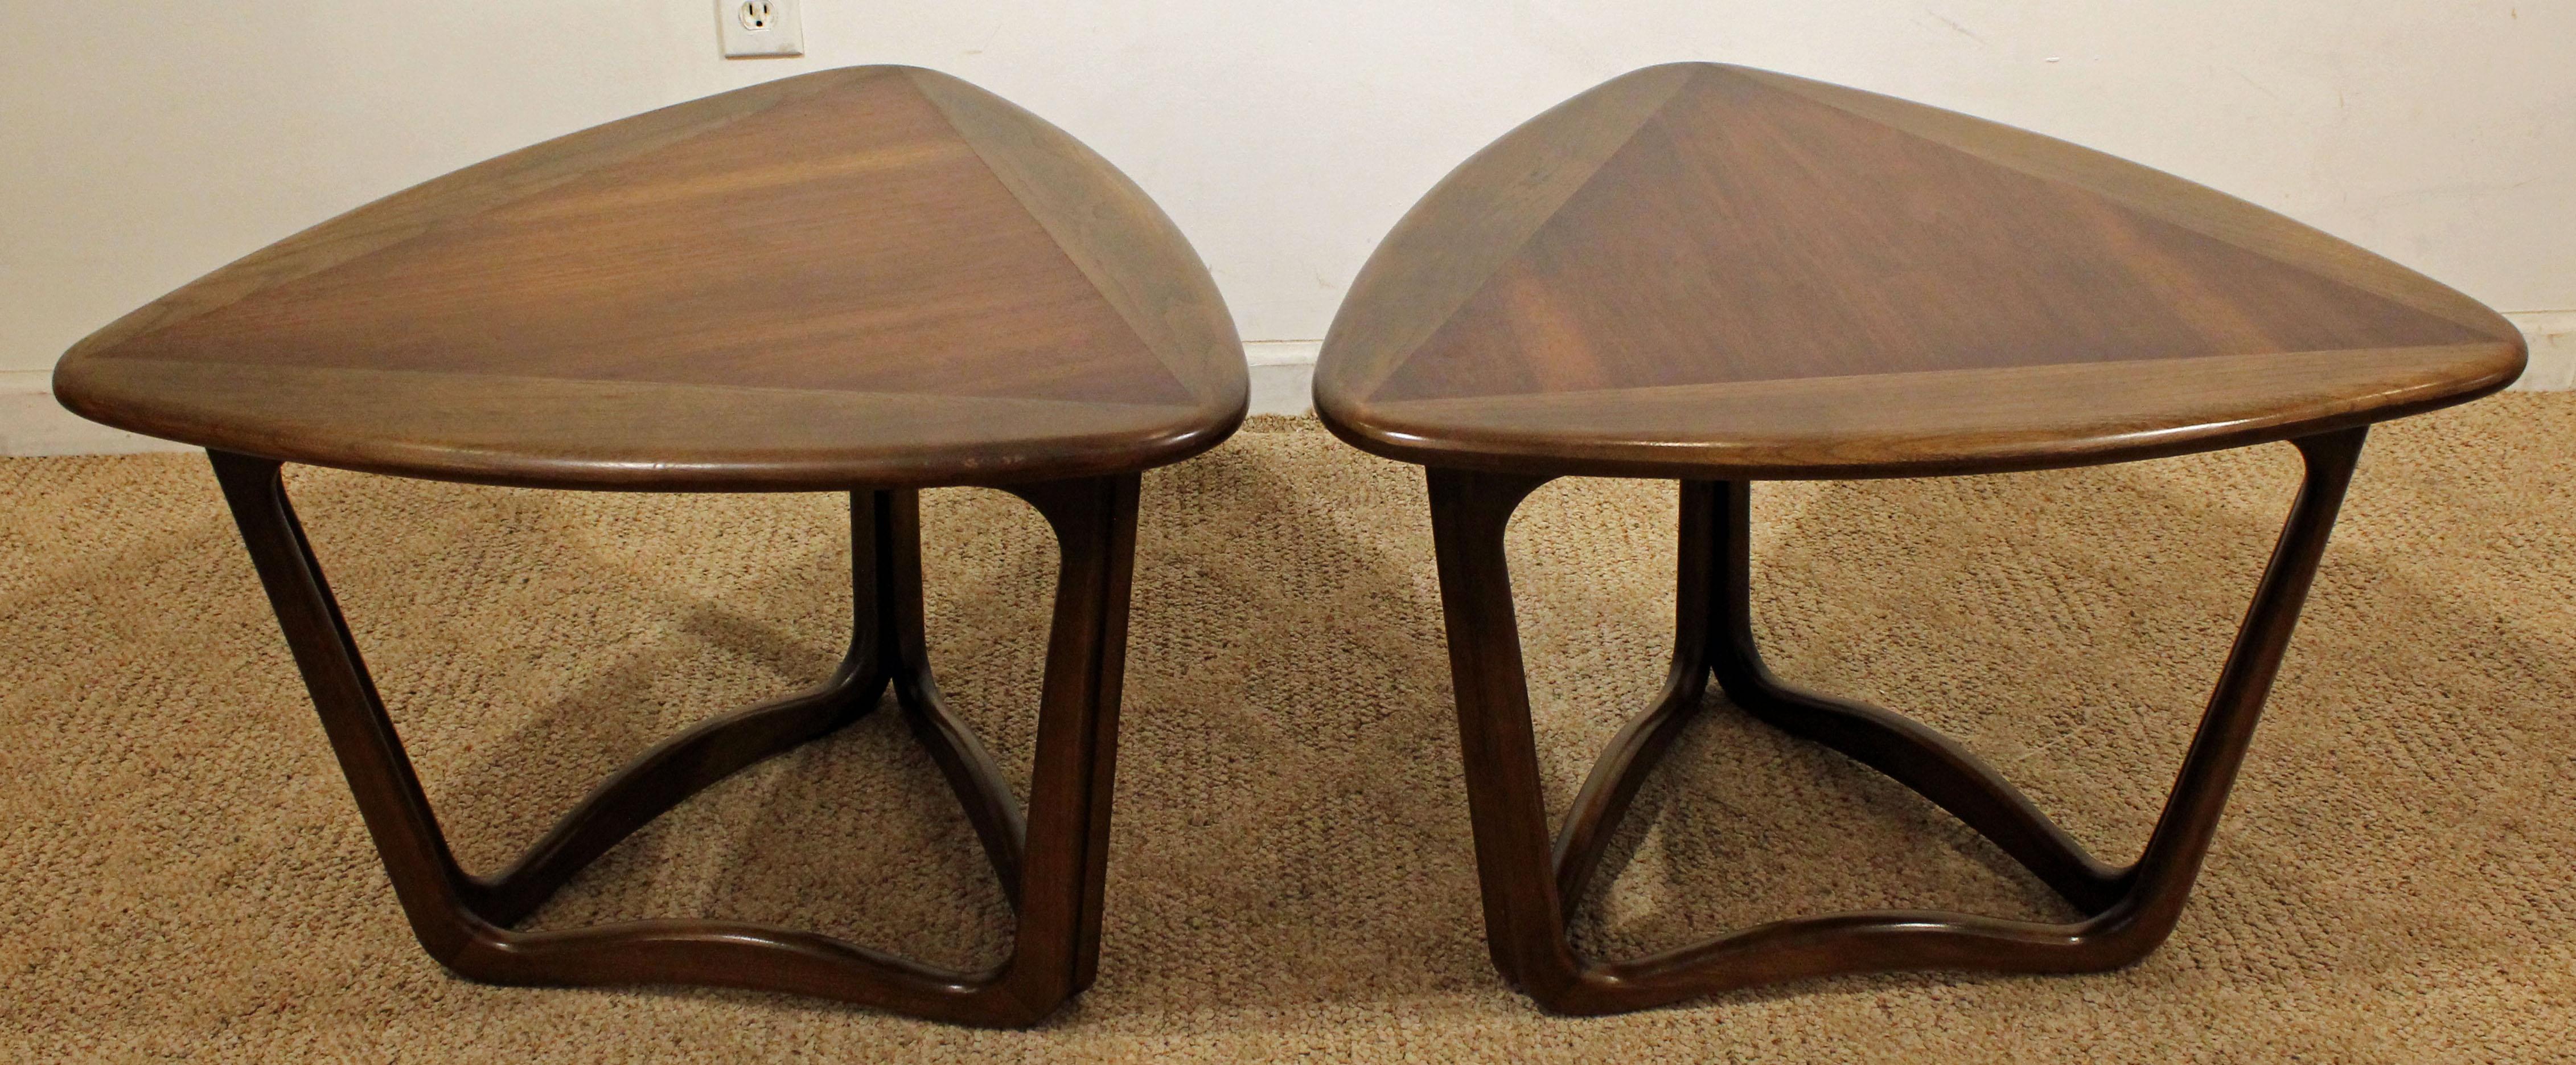 Offered is a pair of Mid-Century Modern end tables from the Lane 'Perception' line. This set features two-toned triangle tops with sculpted legs. They are in excellent condition, signed by Lane. 

Dimensions:
26